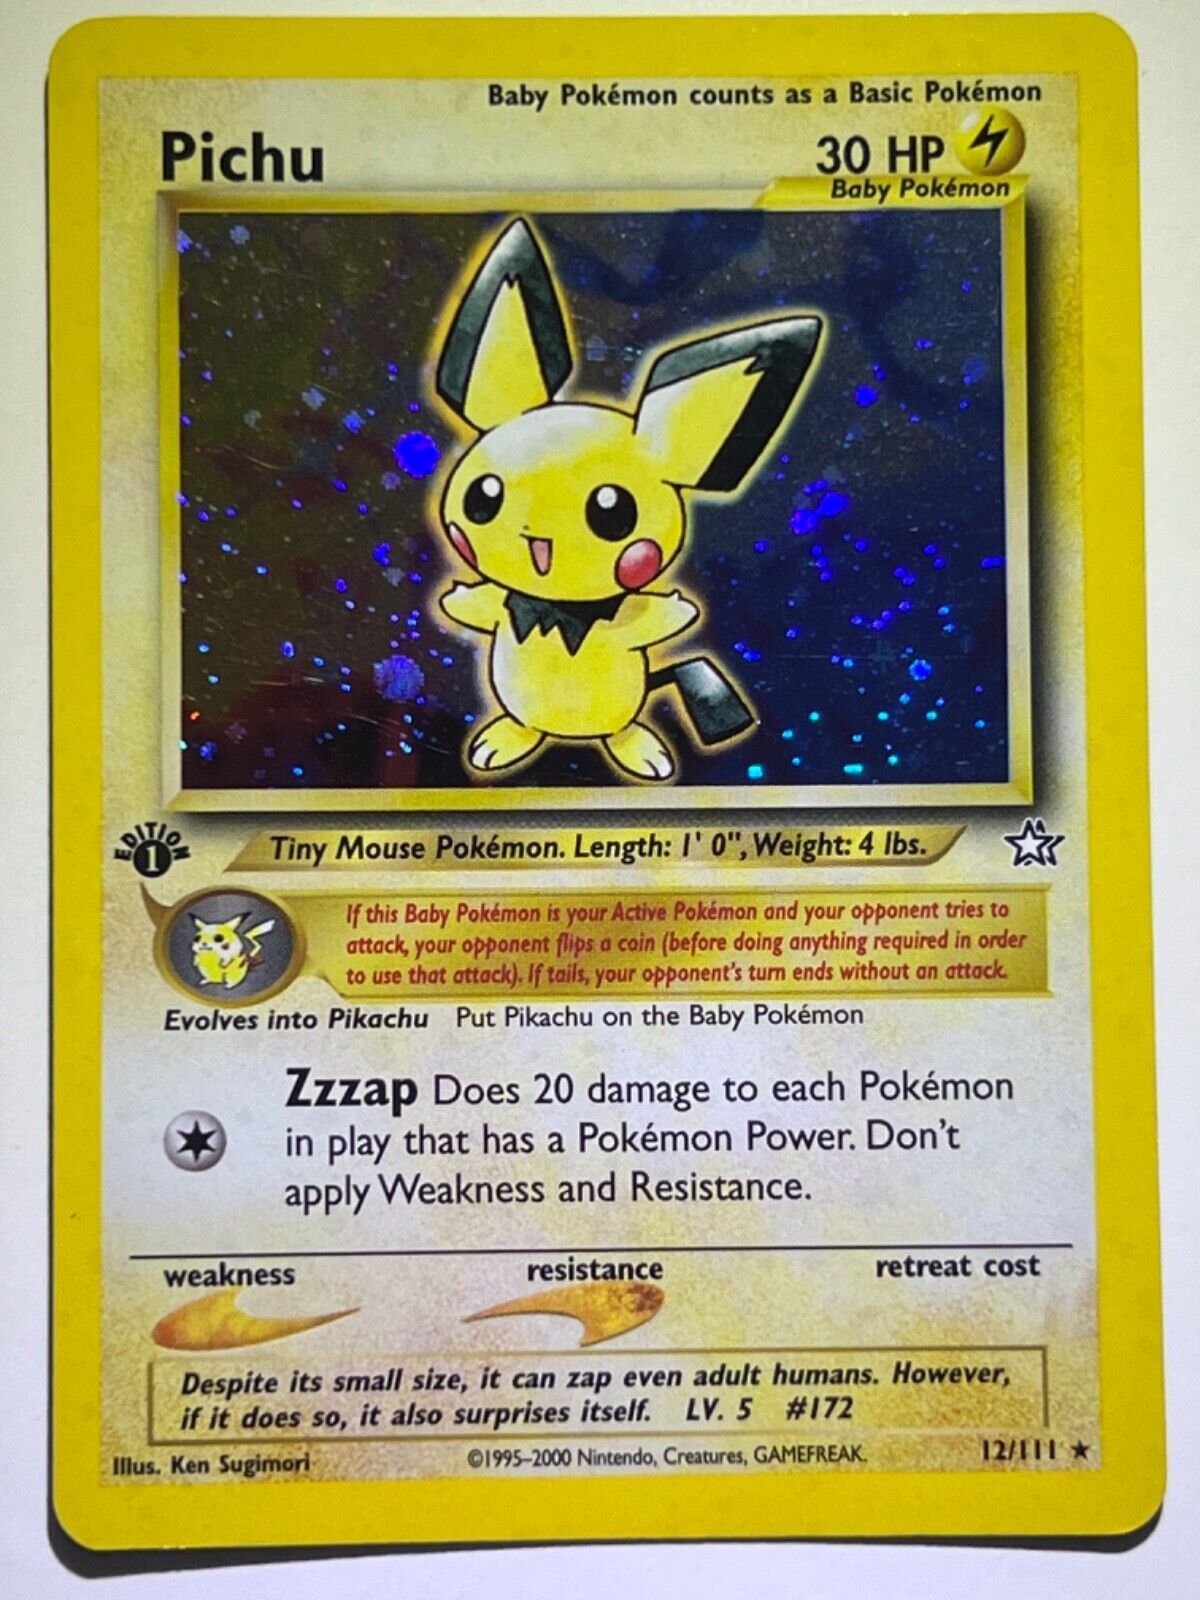 Pokémon Pichu 12/111 1st edition Original Owner opened 23 years ago & put up